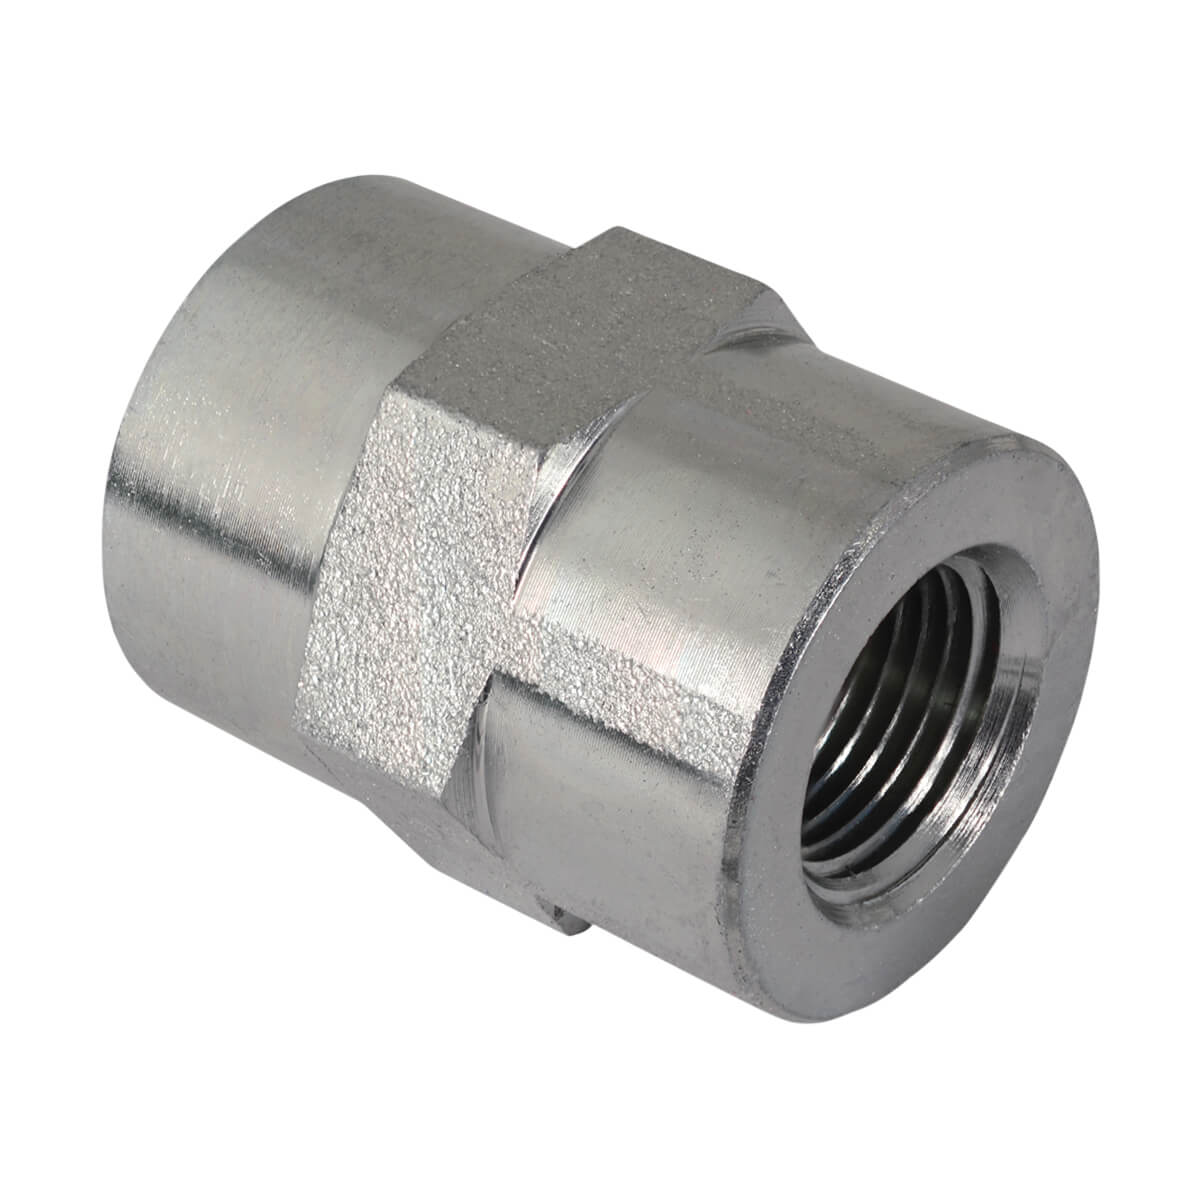 Female Pipe Thread Hydraulic Adapter -3/4-in FPT x 3/4-in